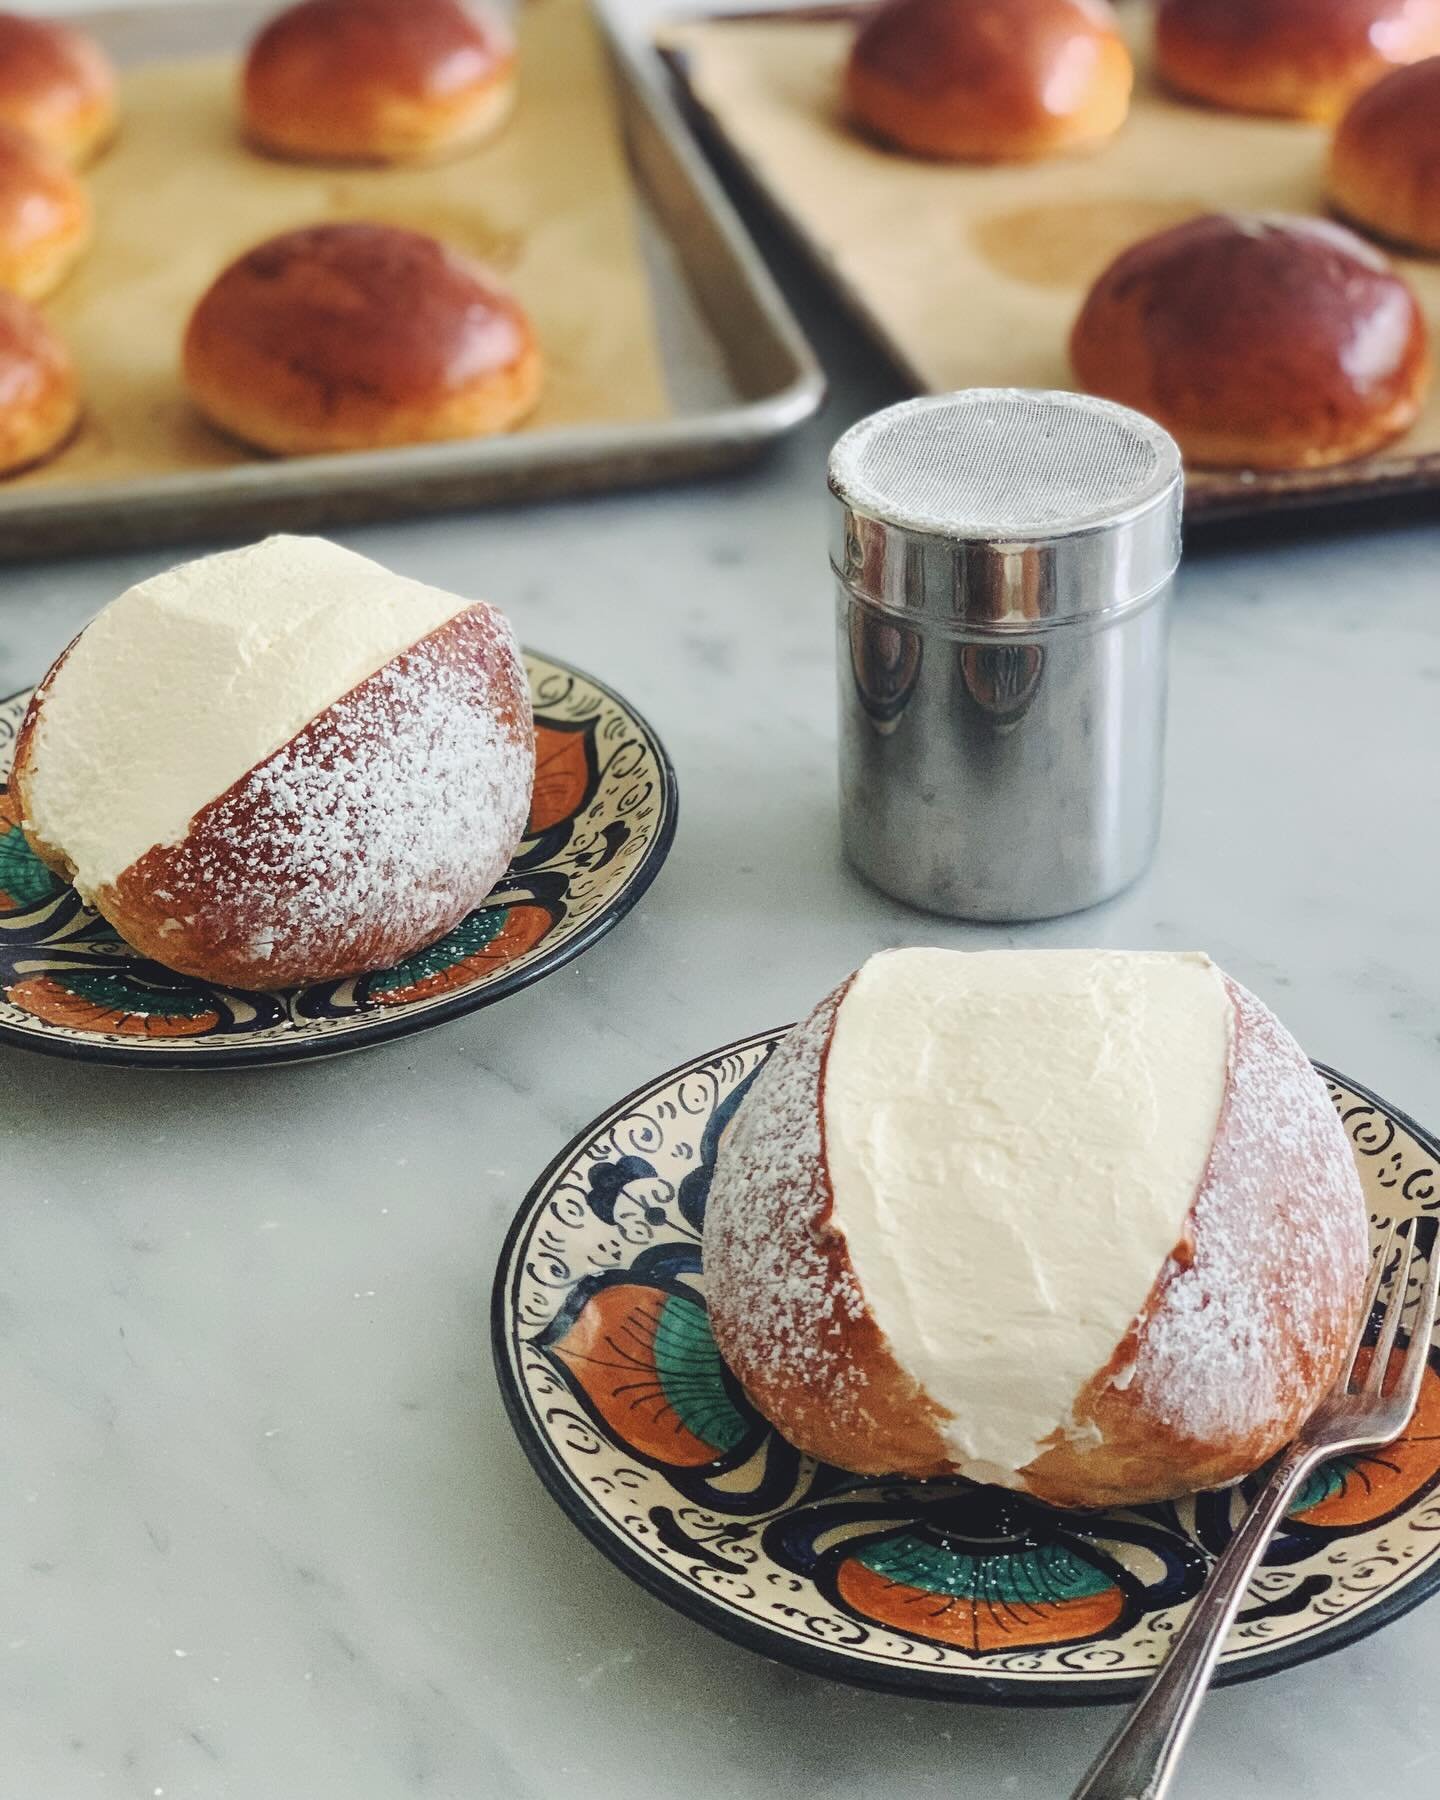 This past Sunday&rsquo;s newsletter was a favorite from the archives. The month of June is nearly upon us, and for me it is invariably associated with maritozzi, the sweet, cream-filled Roman bun that was a favorite of my mom&rsquo;s. I wrote about t